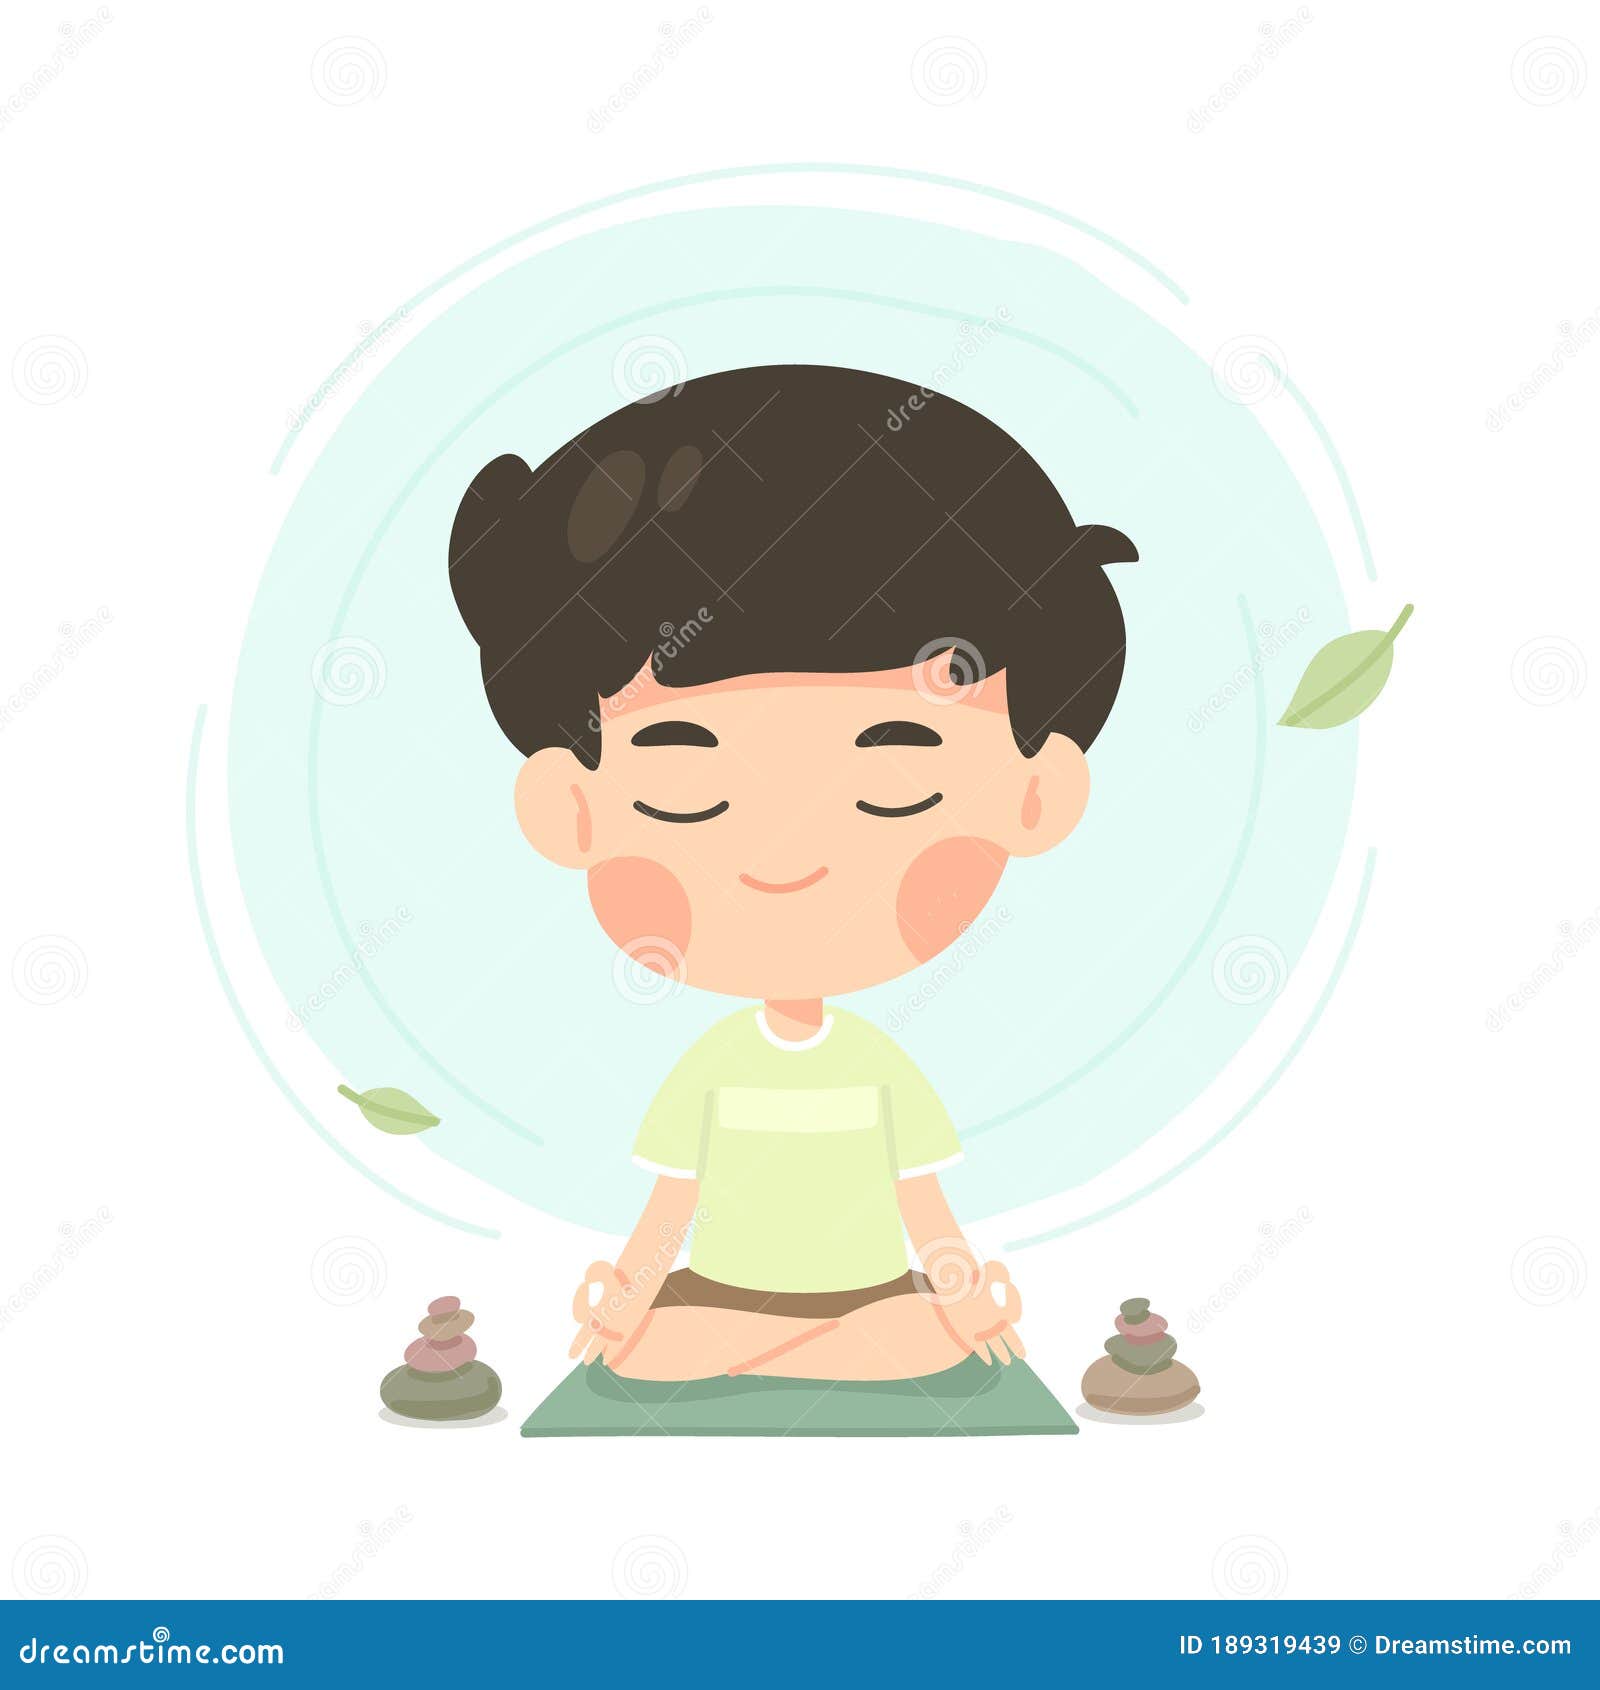 Cute Young Boy Cartoon in Meditation Pose Stock Vector - Illustration of  expression, cartoon: 189319439